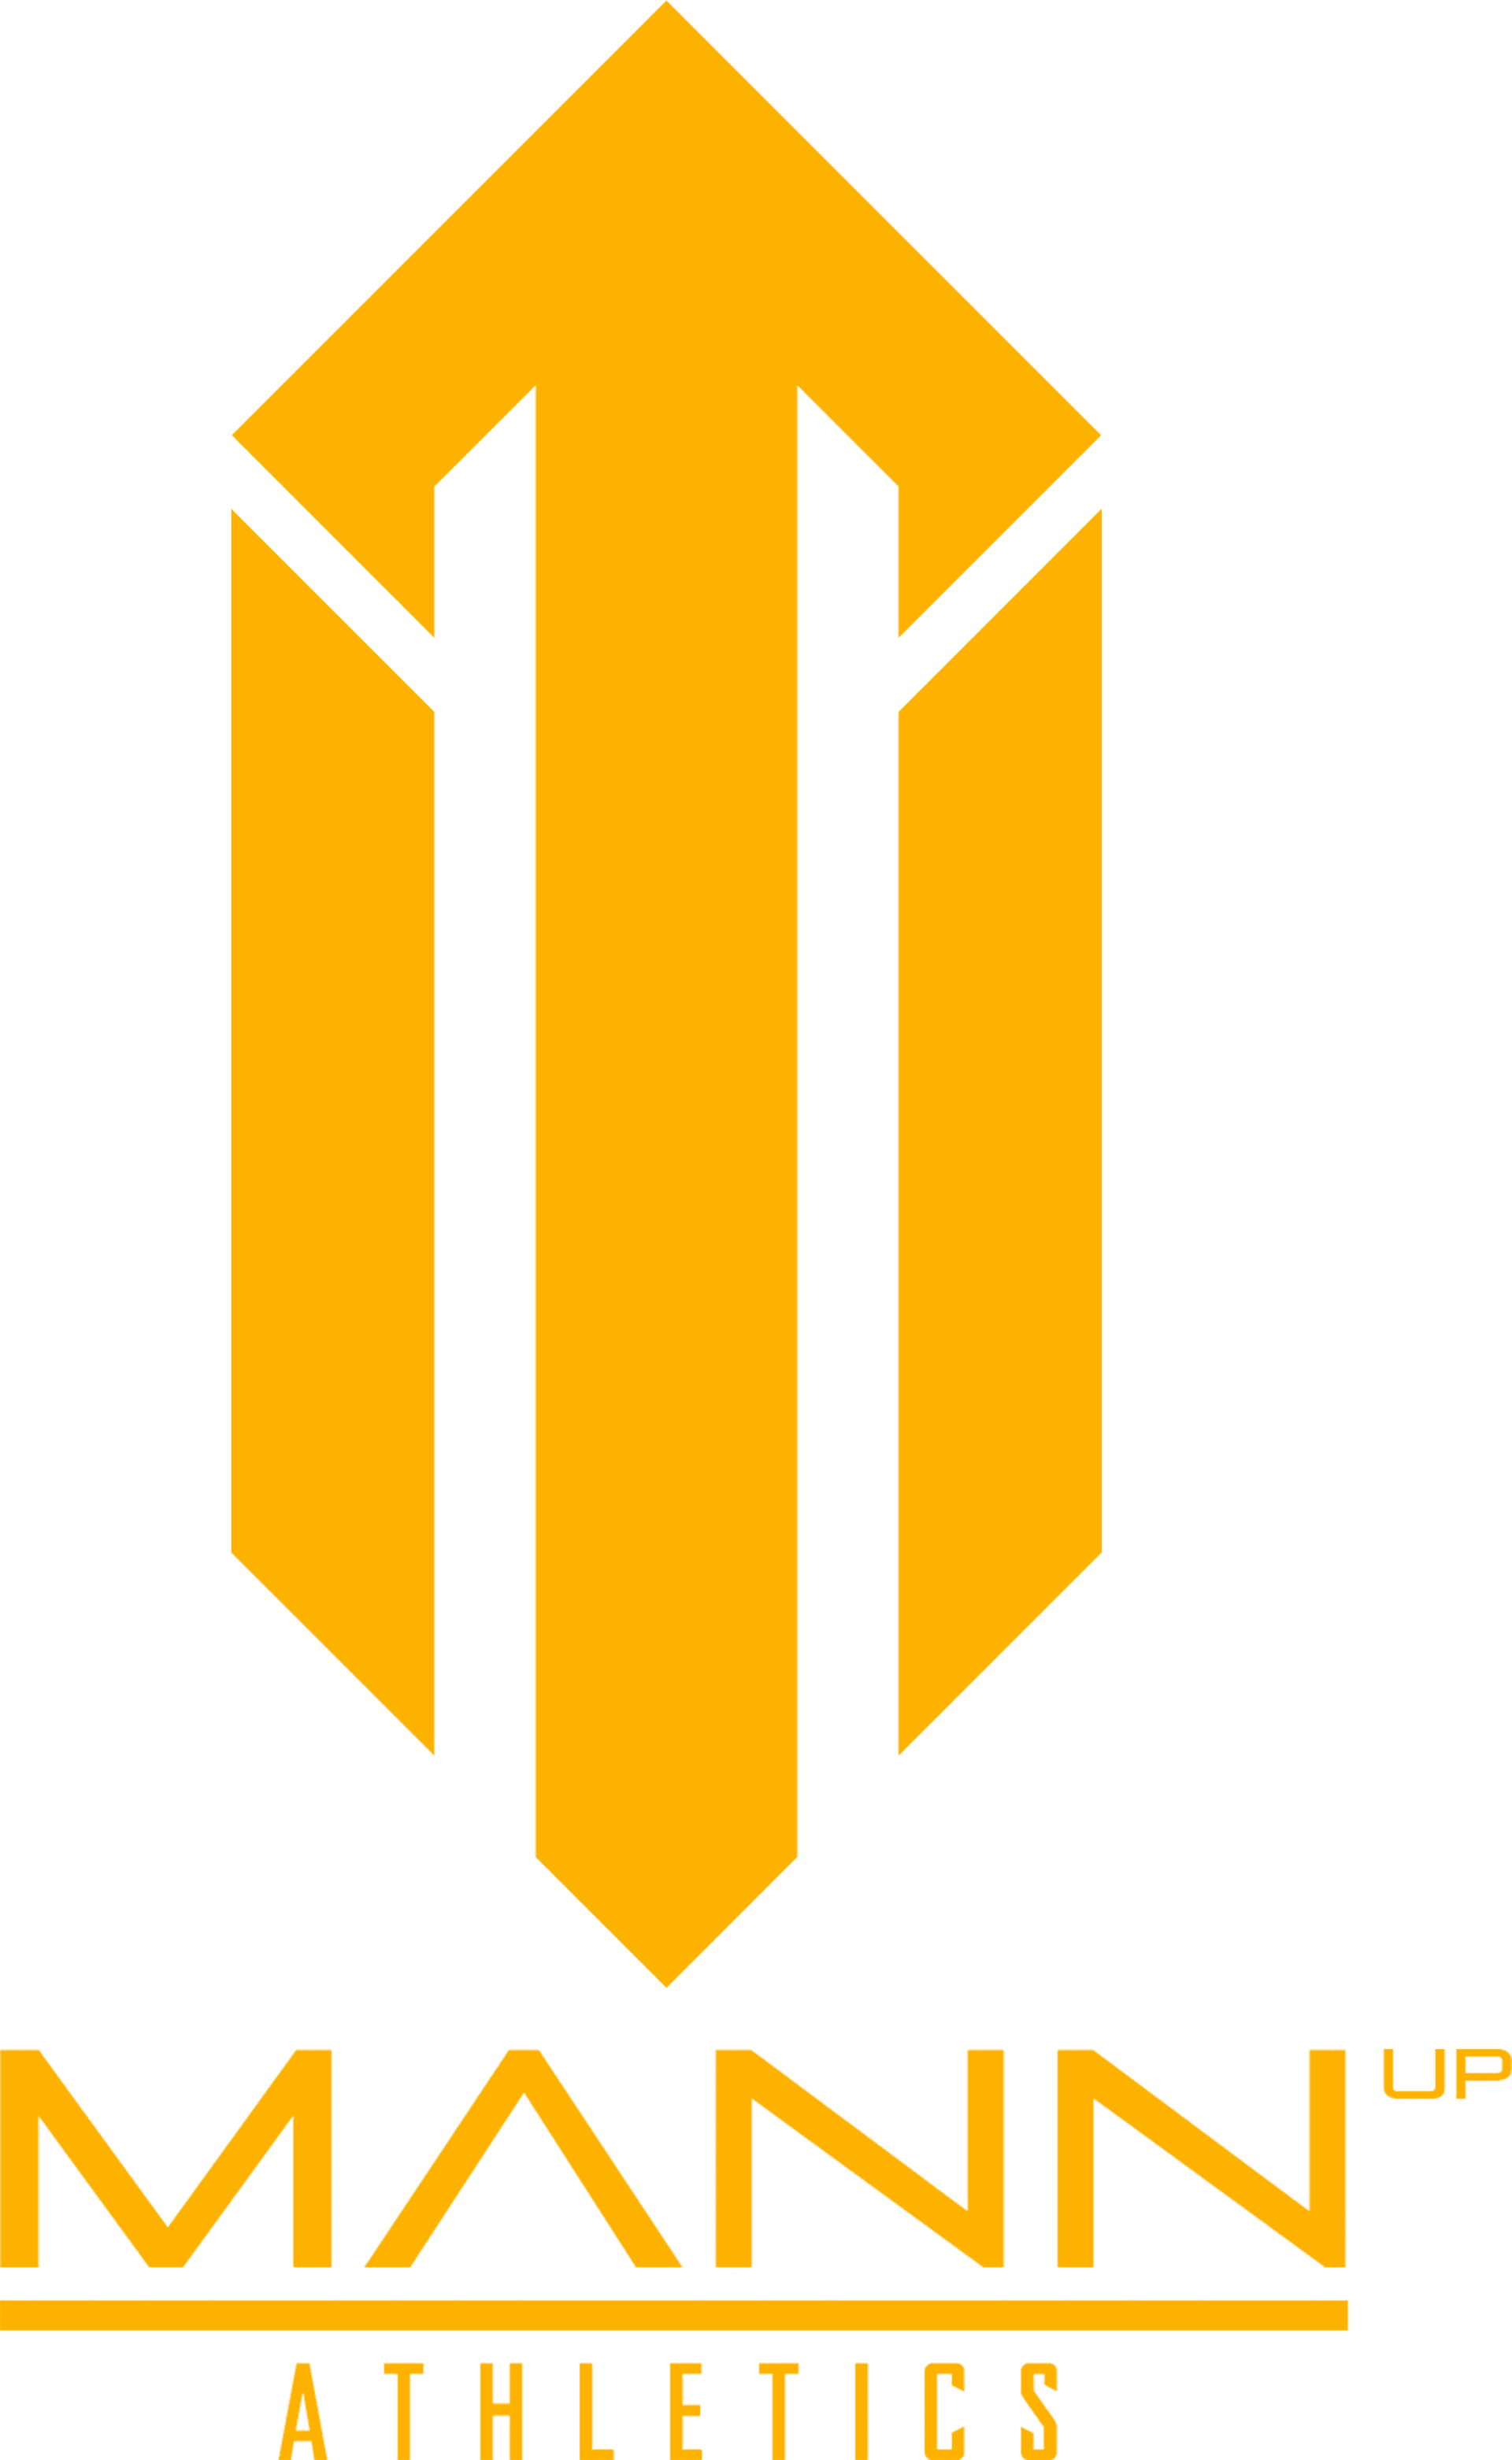 A yellow and white logo for mann athletics